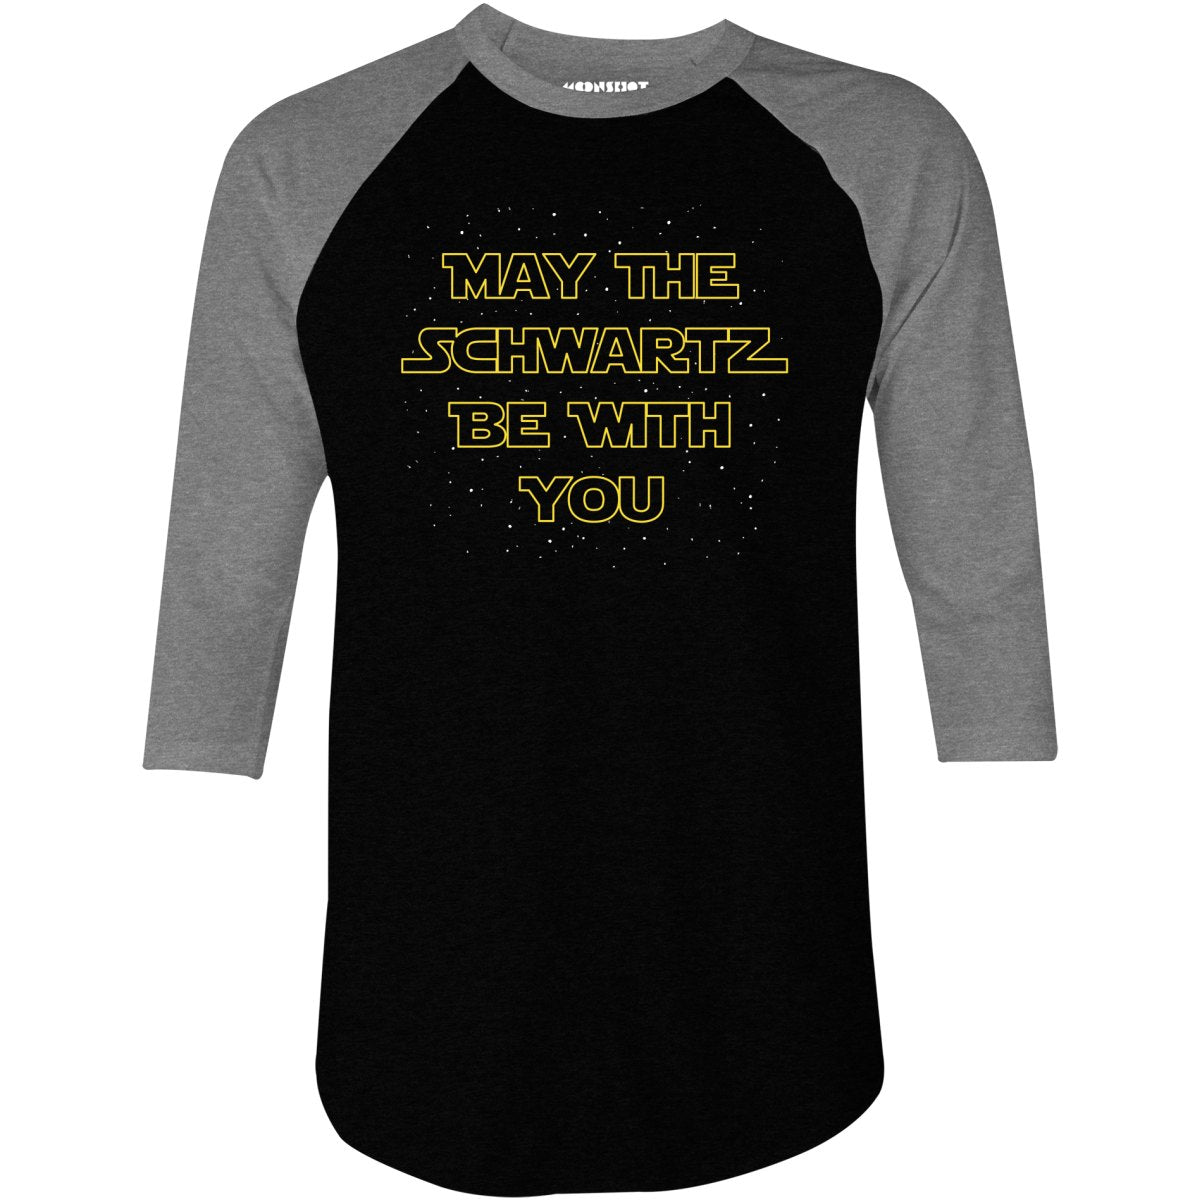 May The Schwartz Be With You - 3/4 Sleeve Raglan T-Shirt